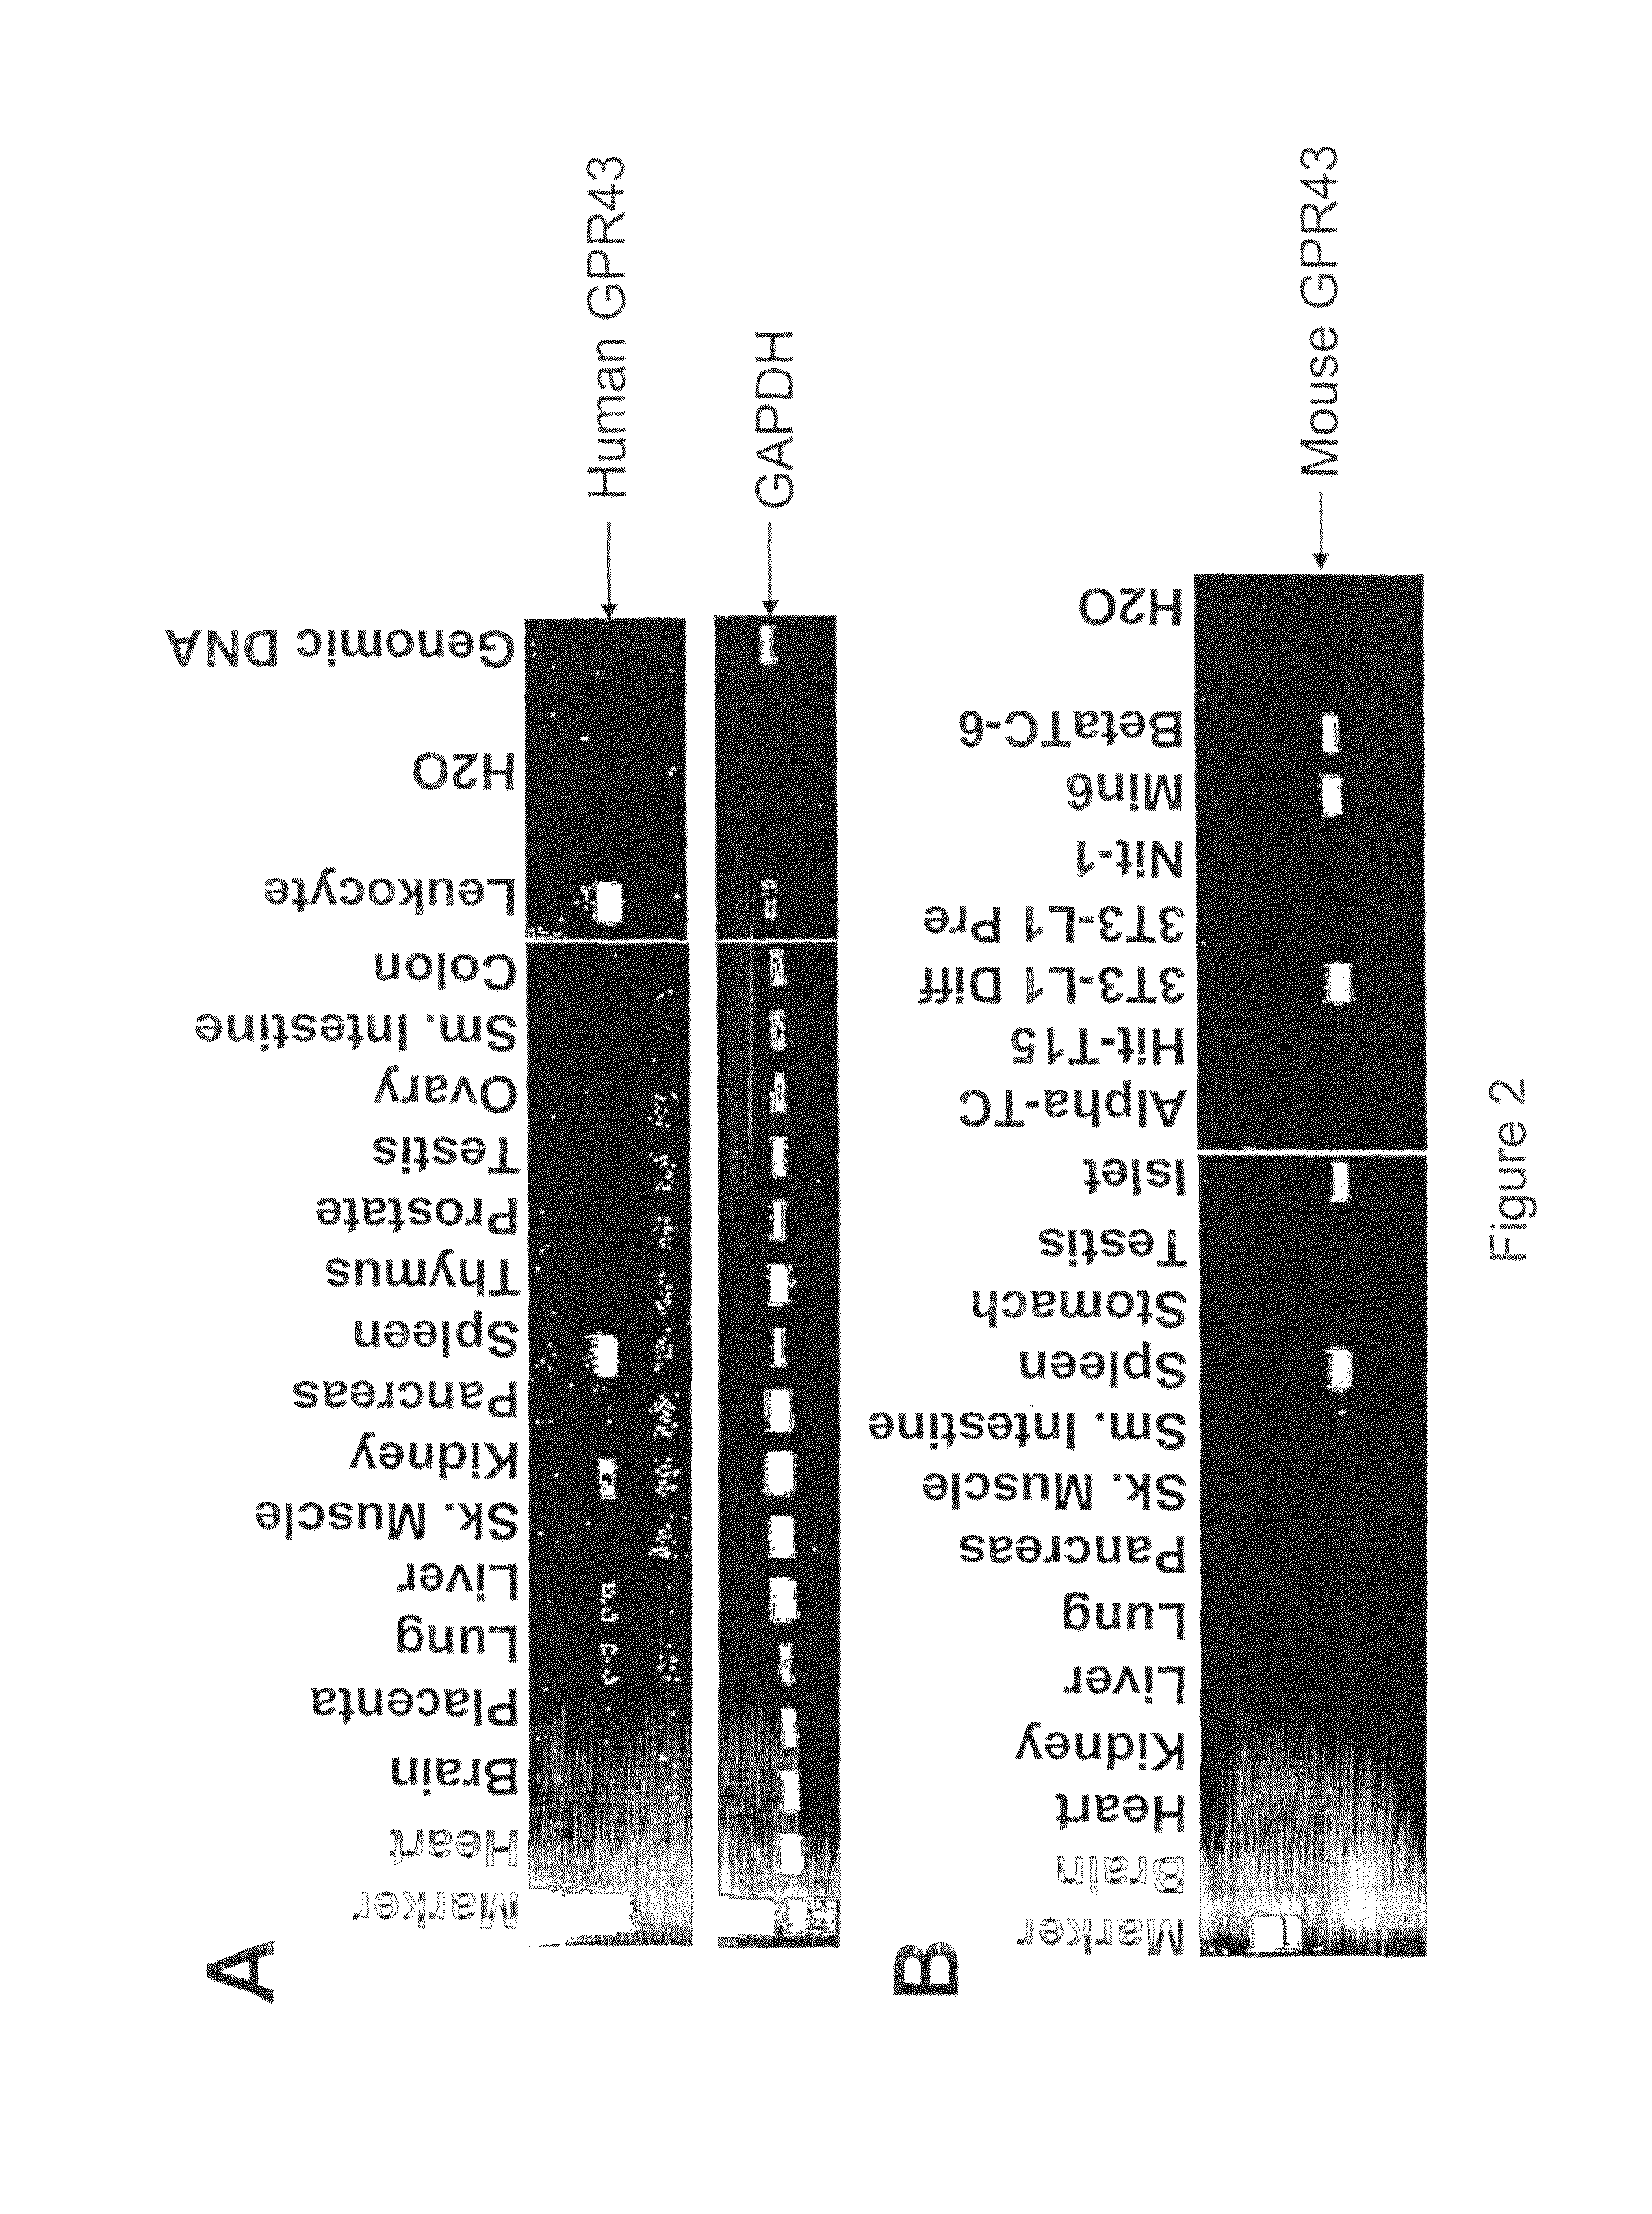 Method of screening for compounds useful in the treatment of insulin resistance, impaired glucose tolerance or diabetes